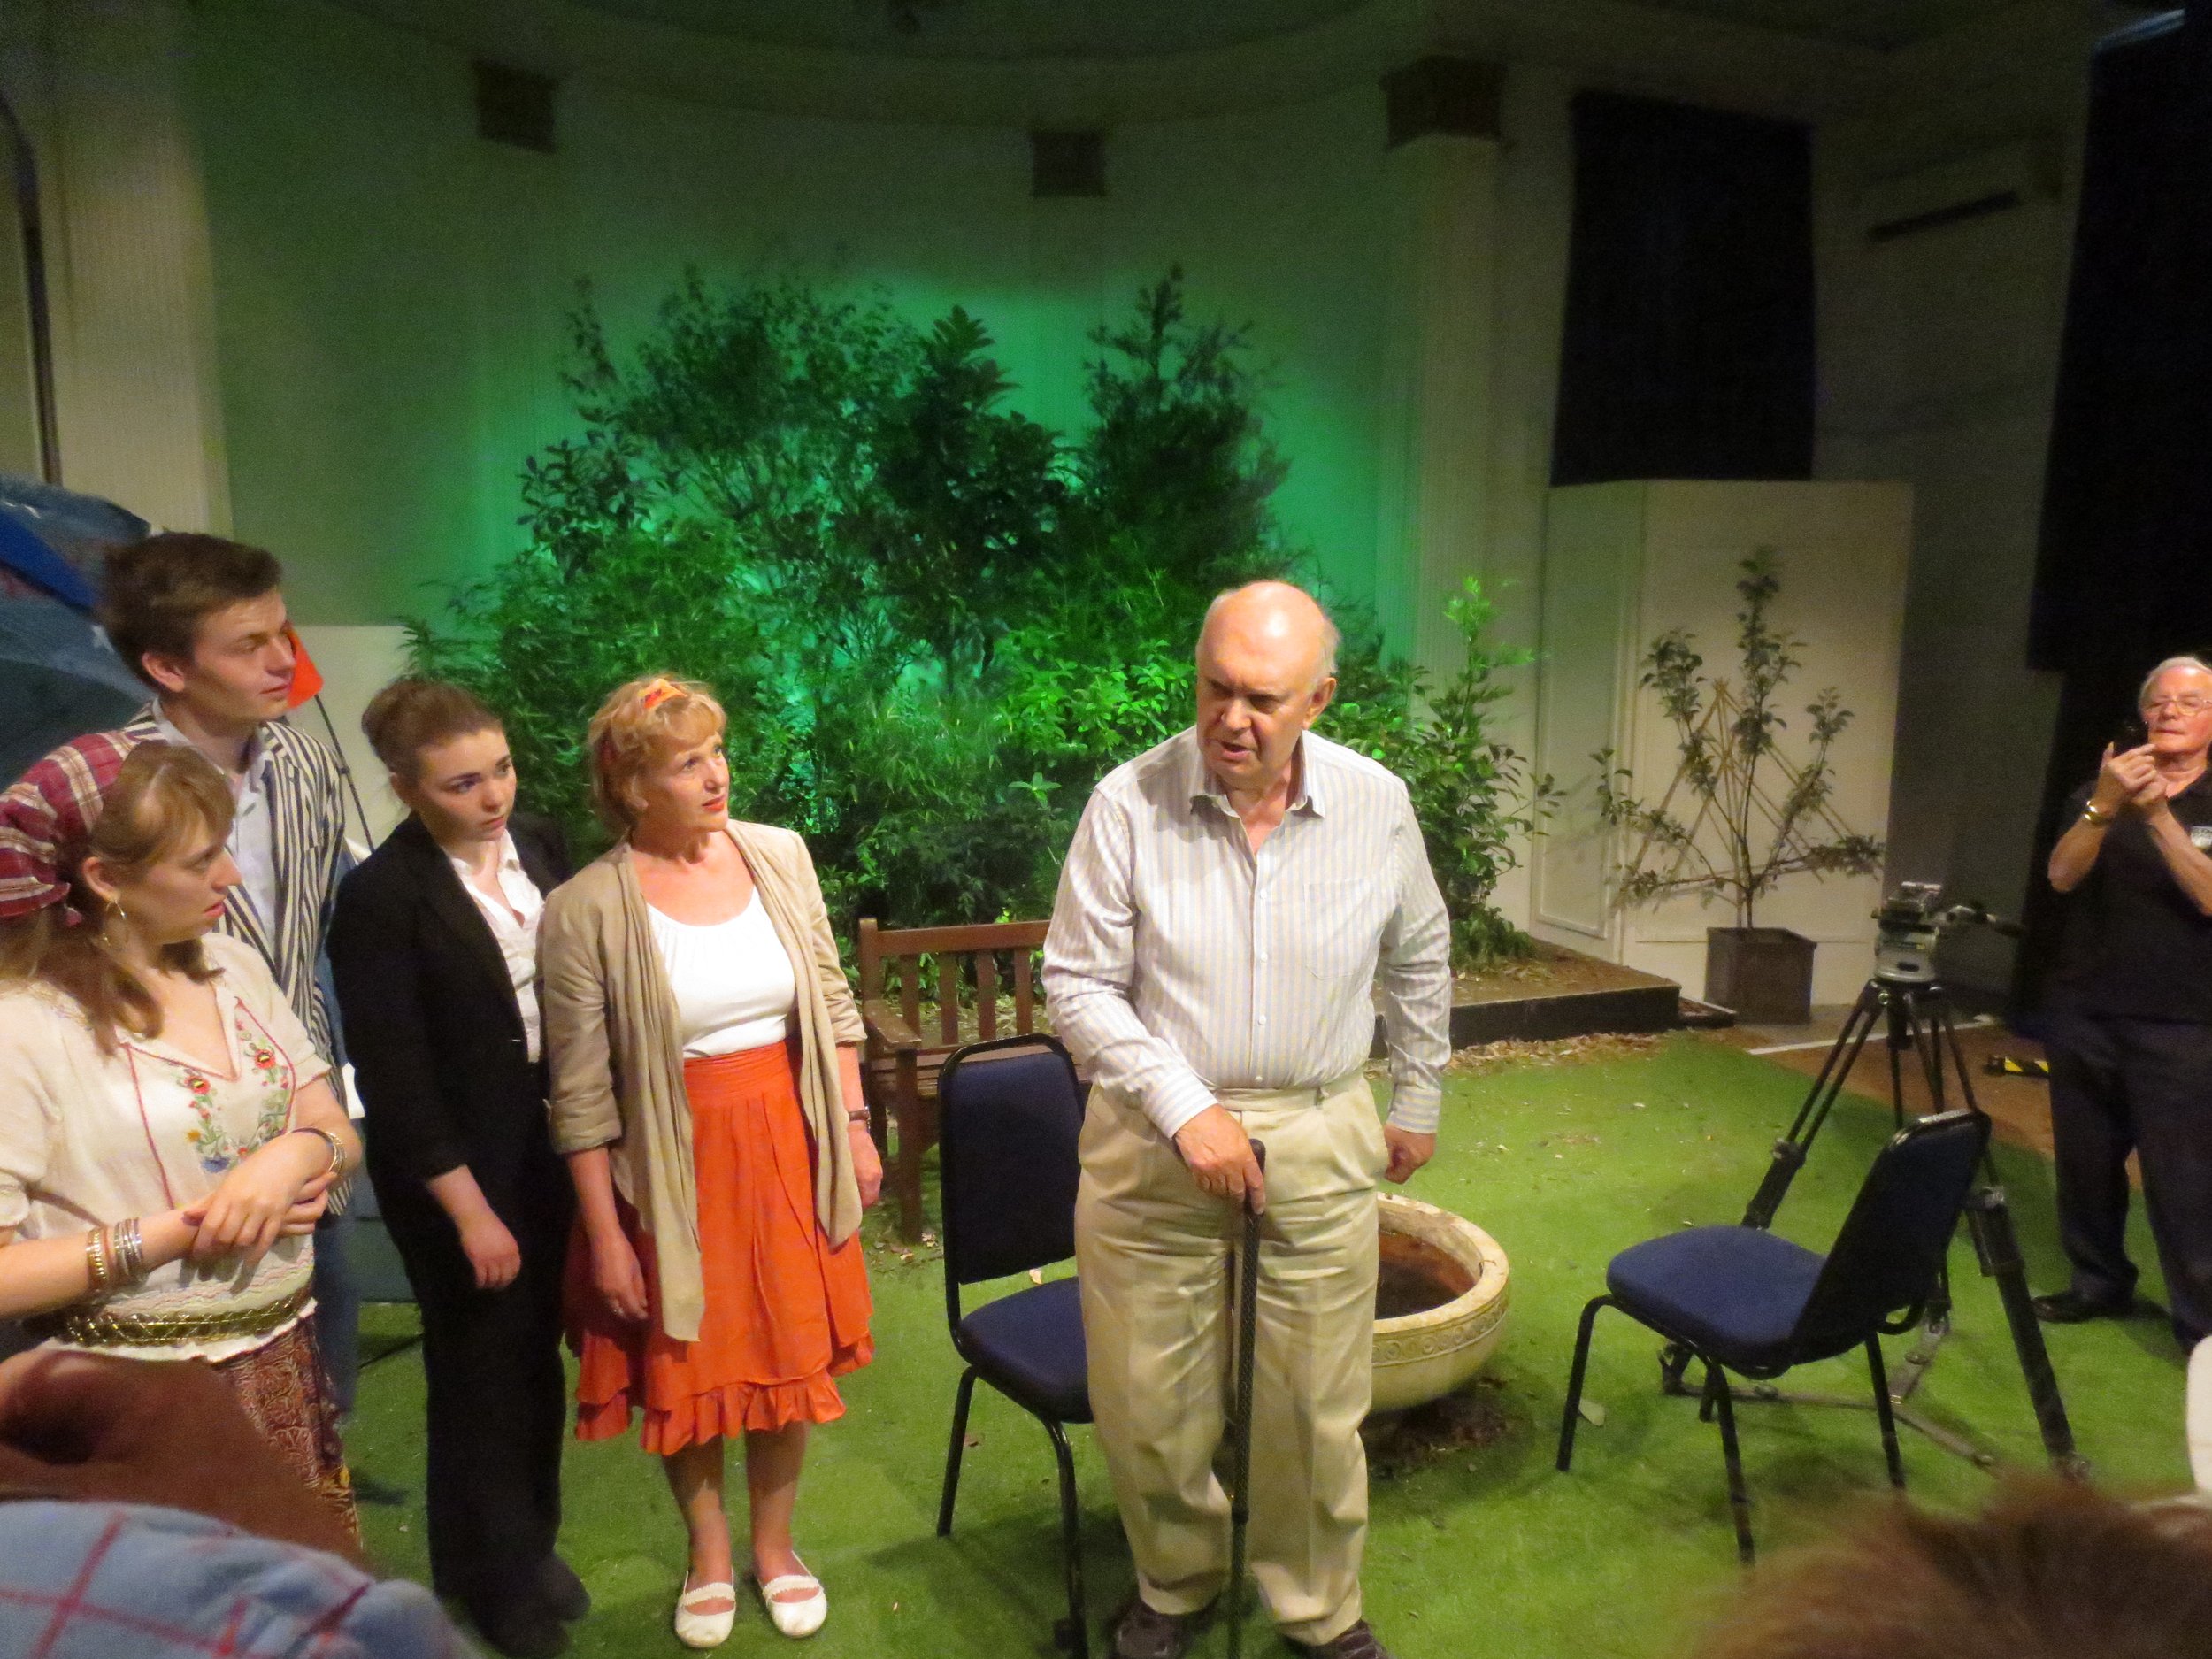 2014: On the company’s 20th anniversary, Sir Alan and Lady Ayckbourn come to Bath to watch both House and Garden performed simultaneously as The Mission Theatre by Next Stage, 